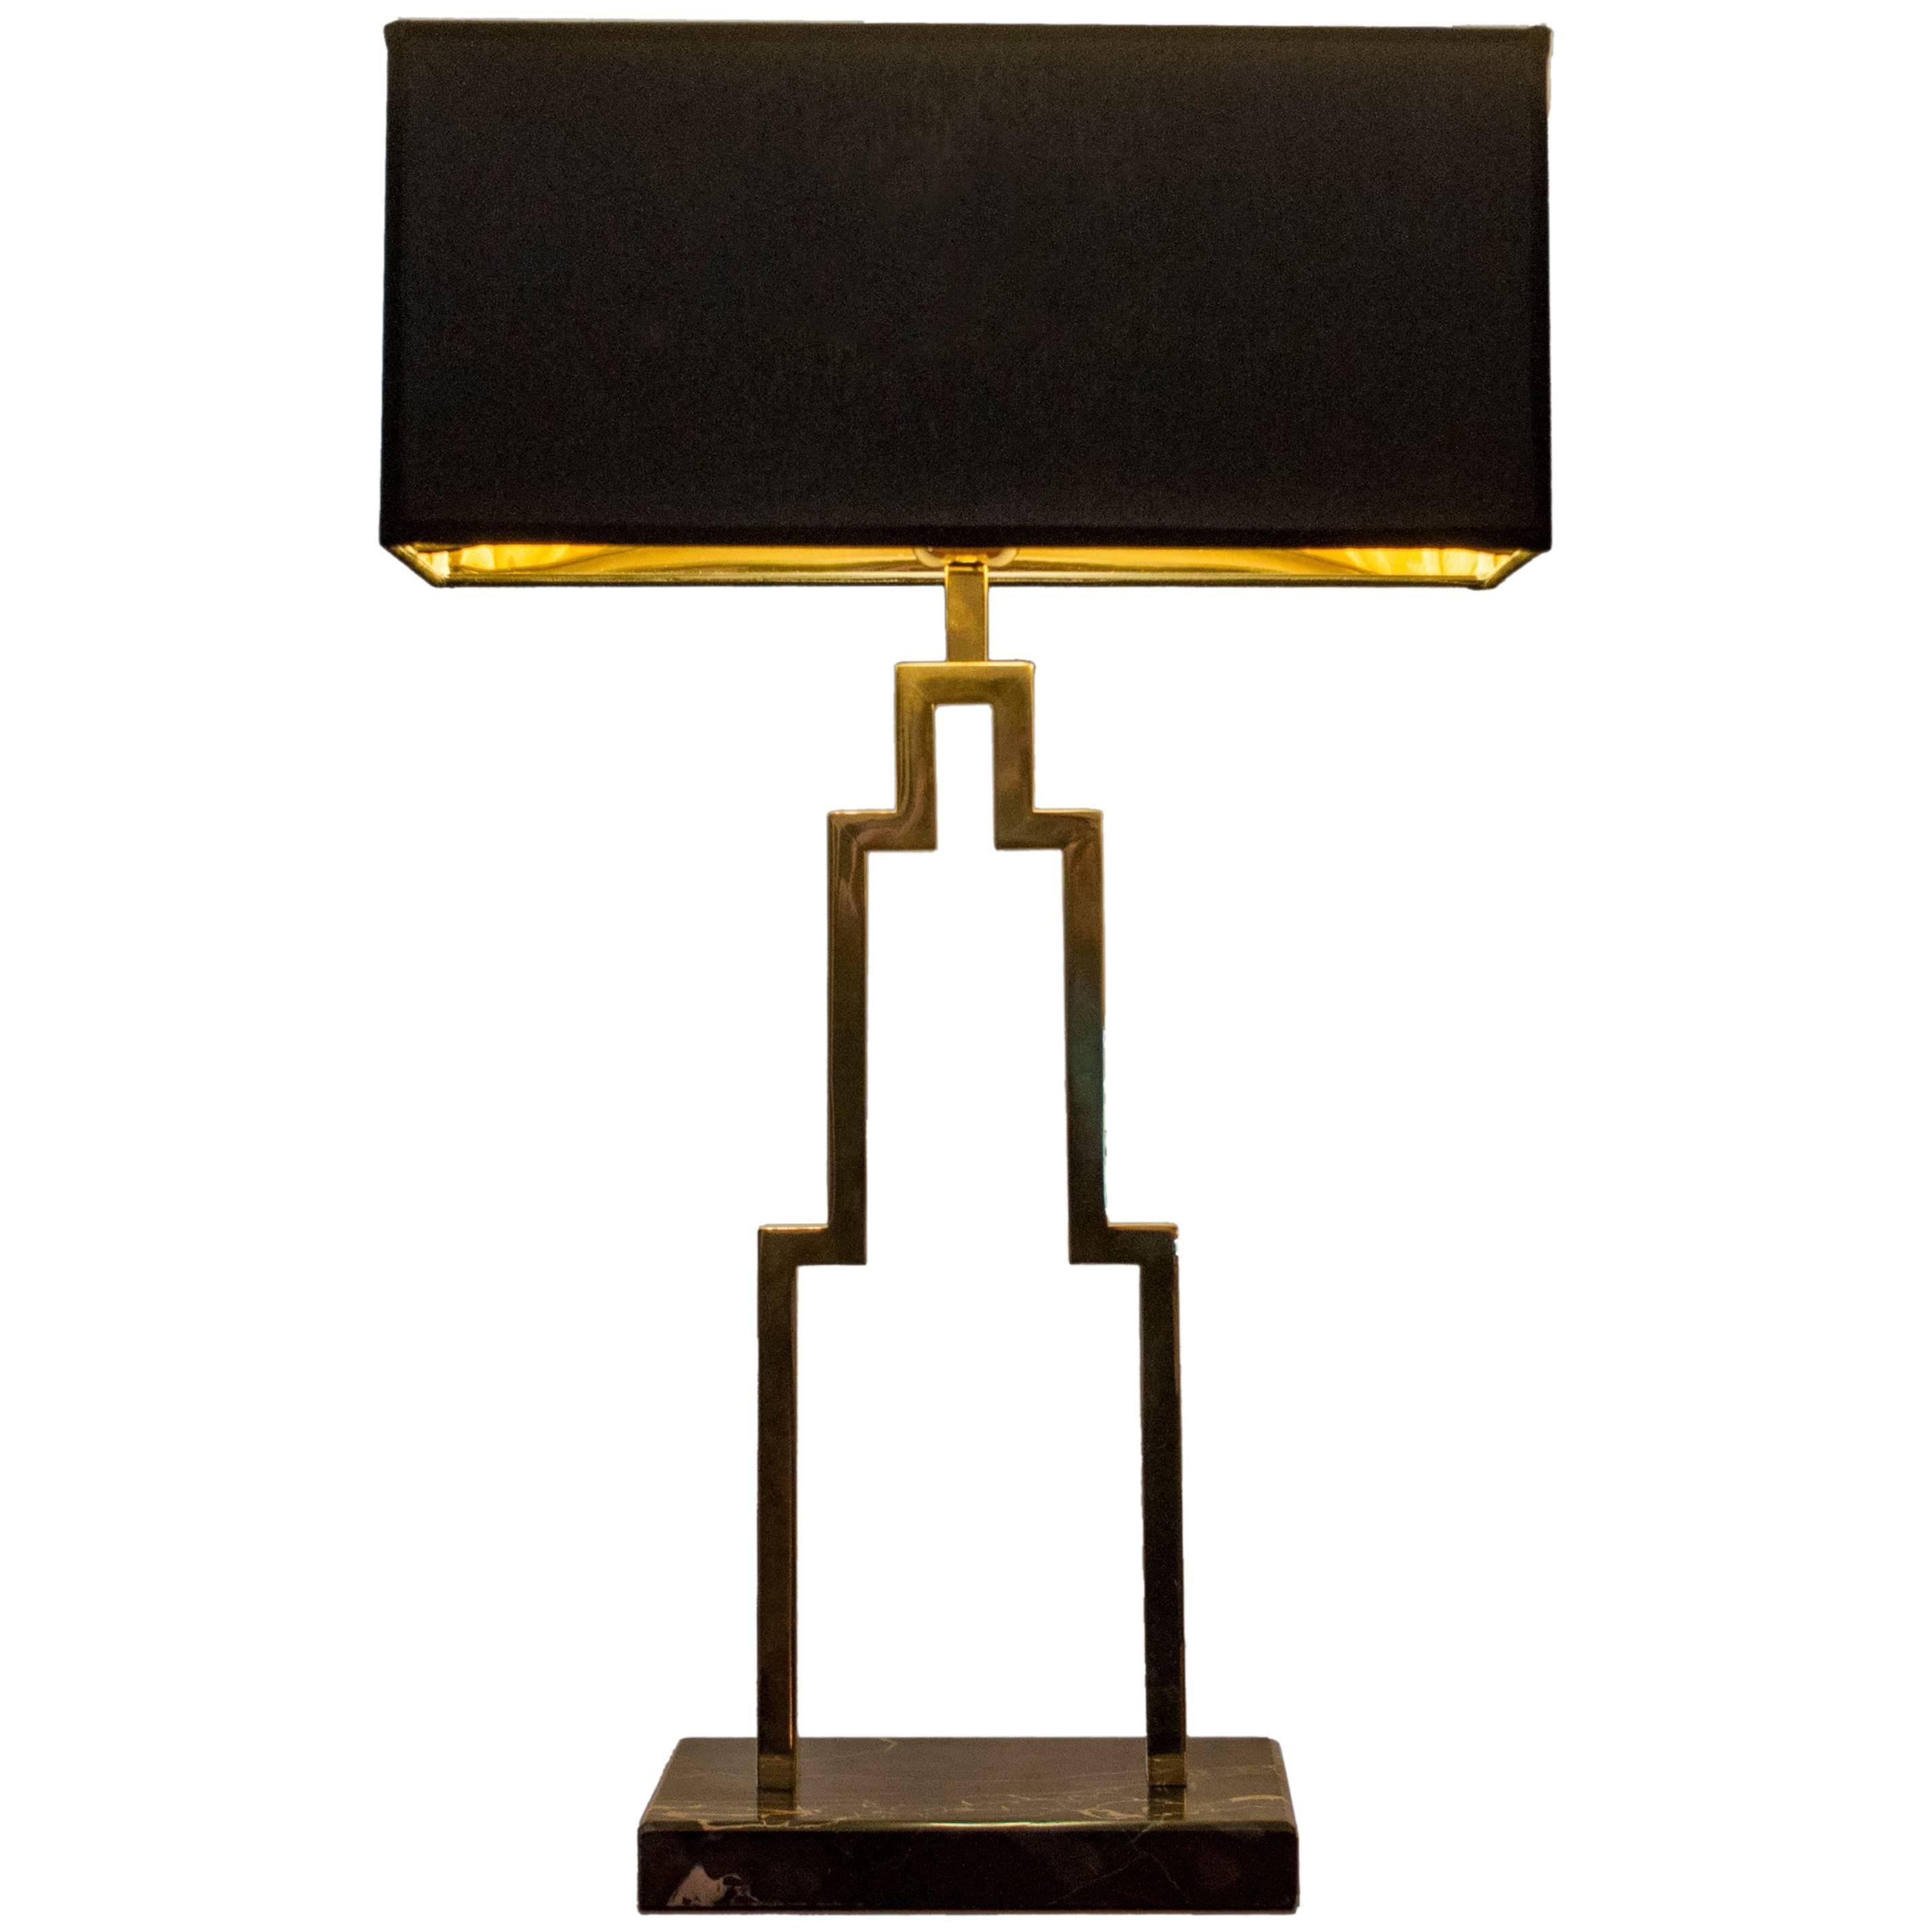 Manhattan Polished Brass Table Lamp & Portoro Marble, Made in italy by artisans For Sale